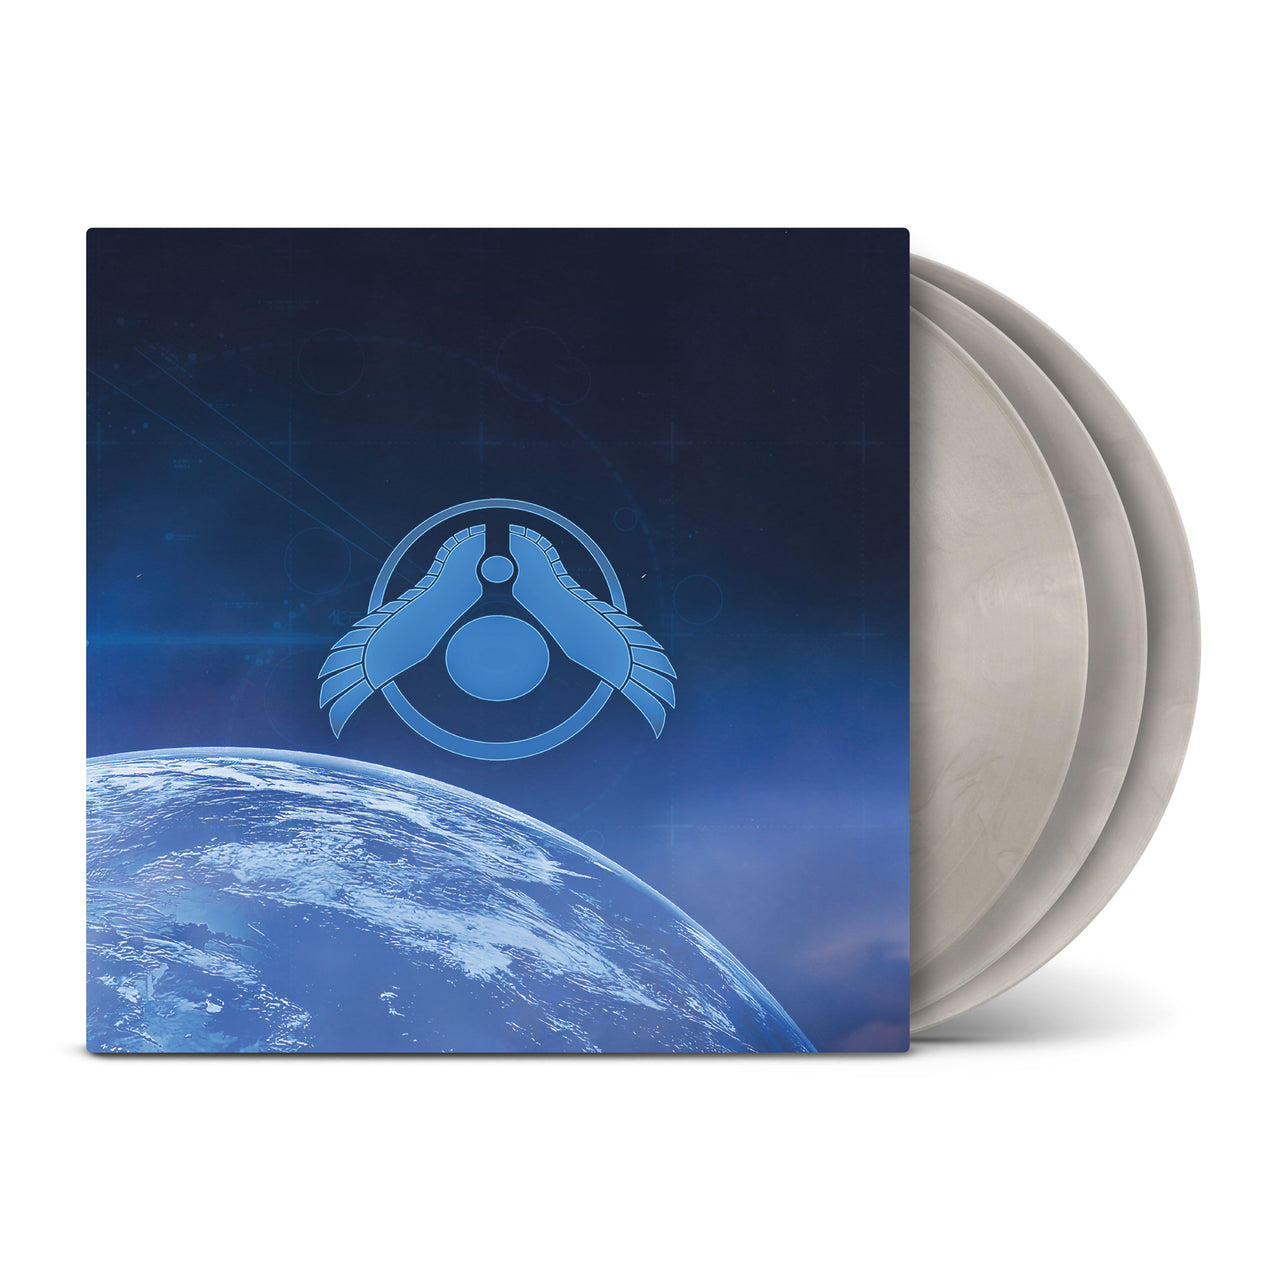 Homeworld 2 Remastered (Limited Edition Deluxe Triple Vinyl)